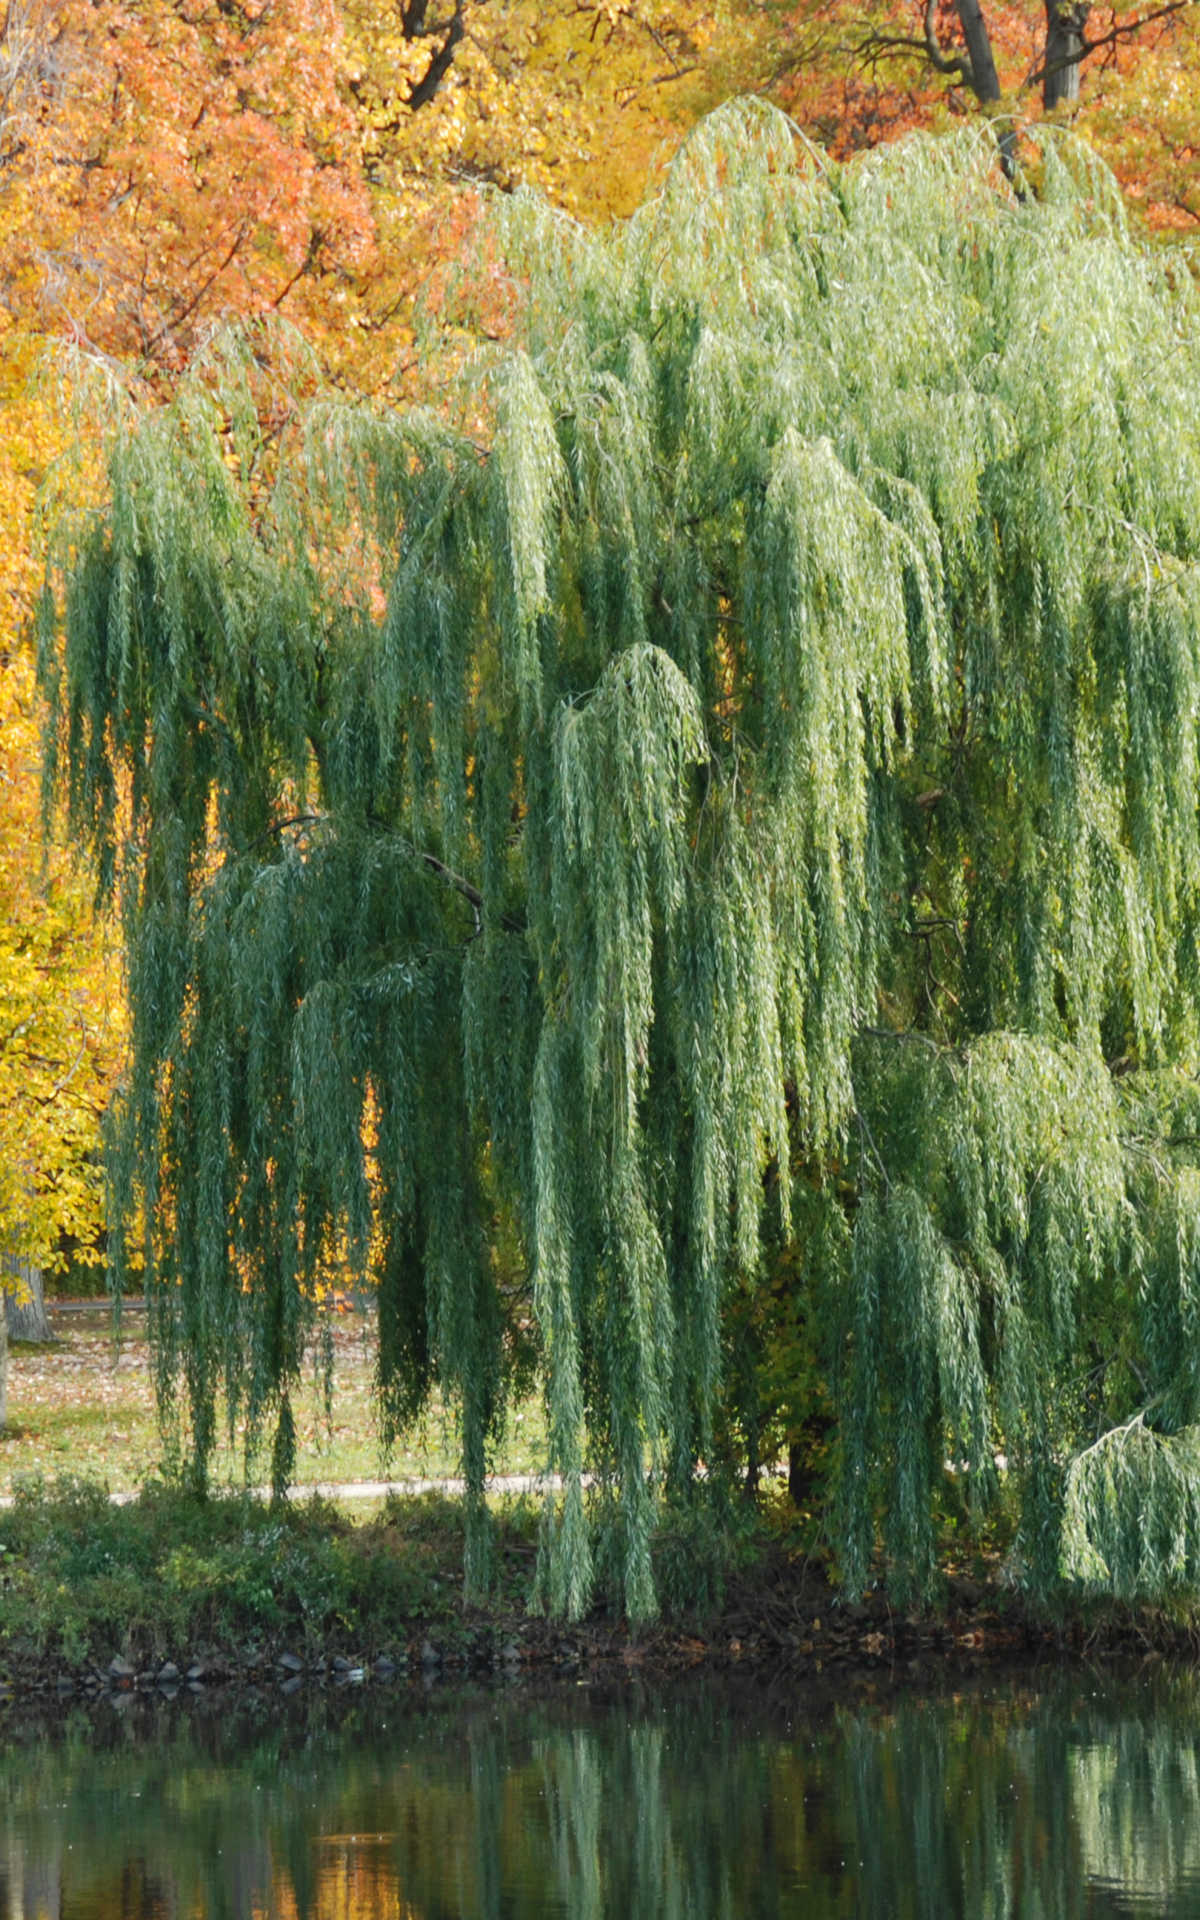 1200x1920 Free download weeping willow tree weeping willow tree drawings weeping willow [3872x2592] for your Desktop, Mobile \u0026 Tablet | Explore 48+ Weeping Willow Tree Wallpaper | Willow Tree Wallpaper